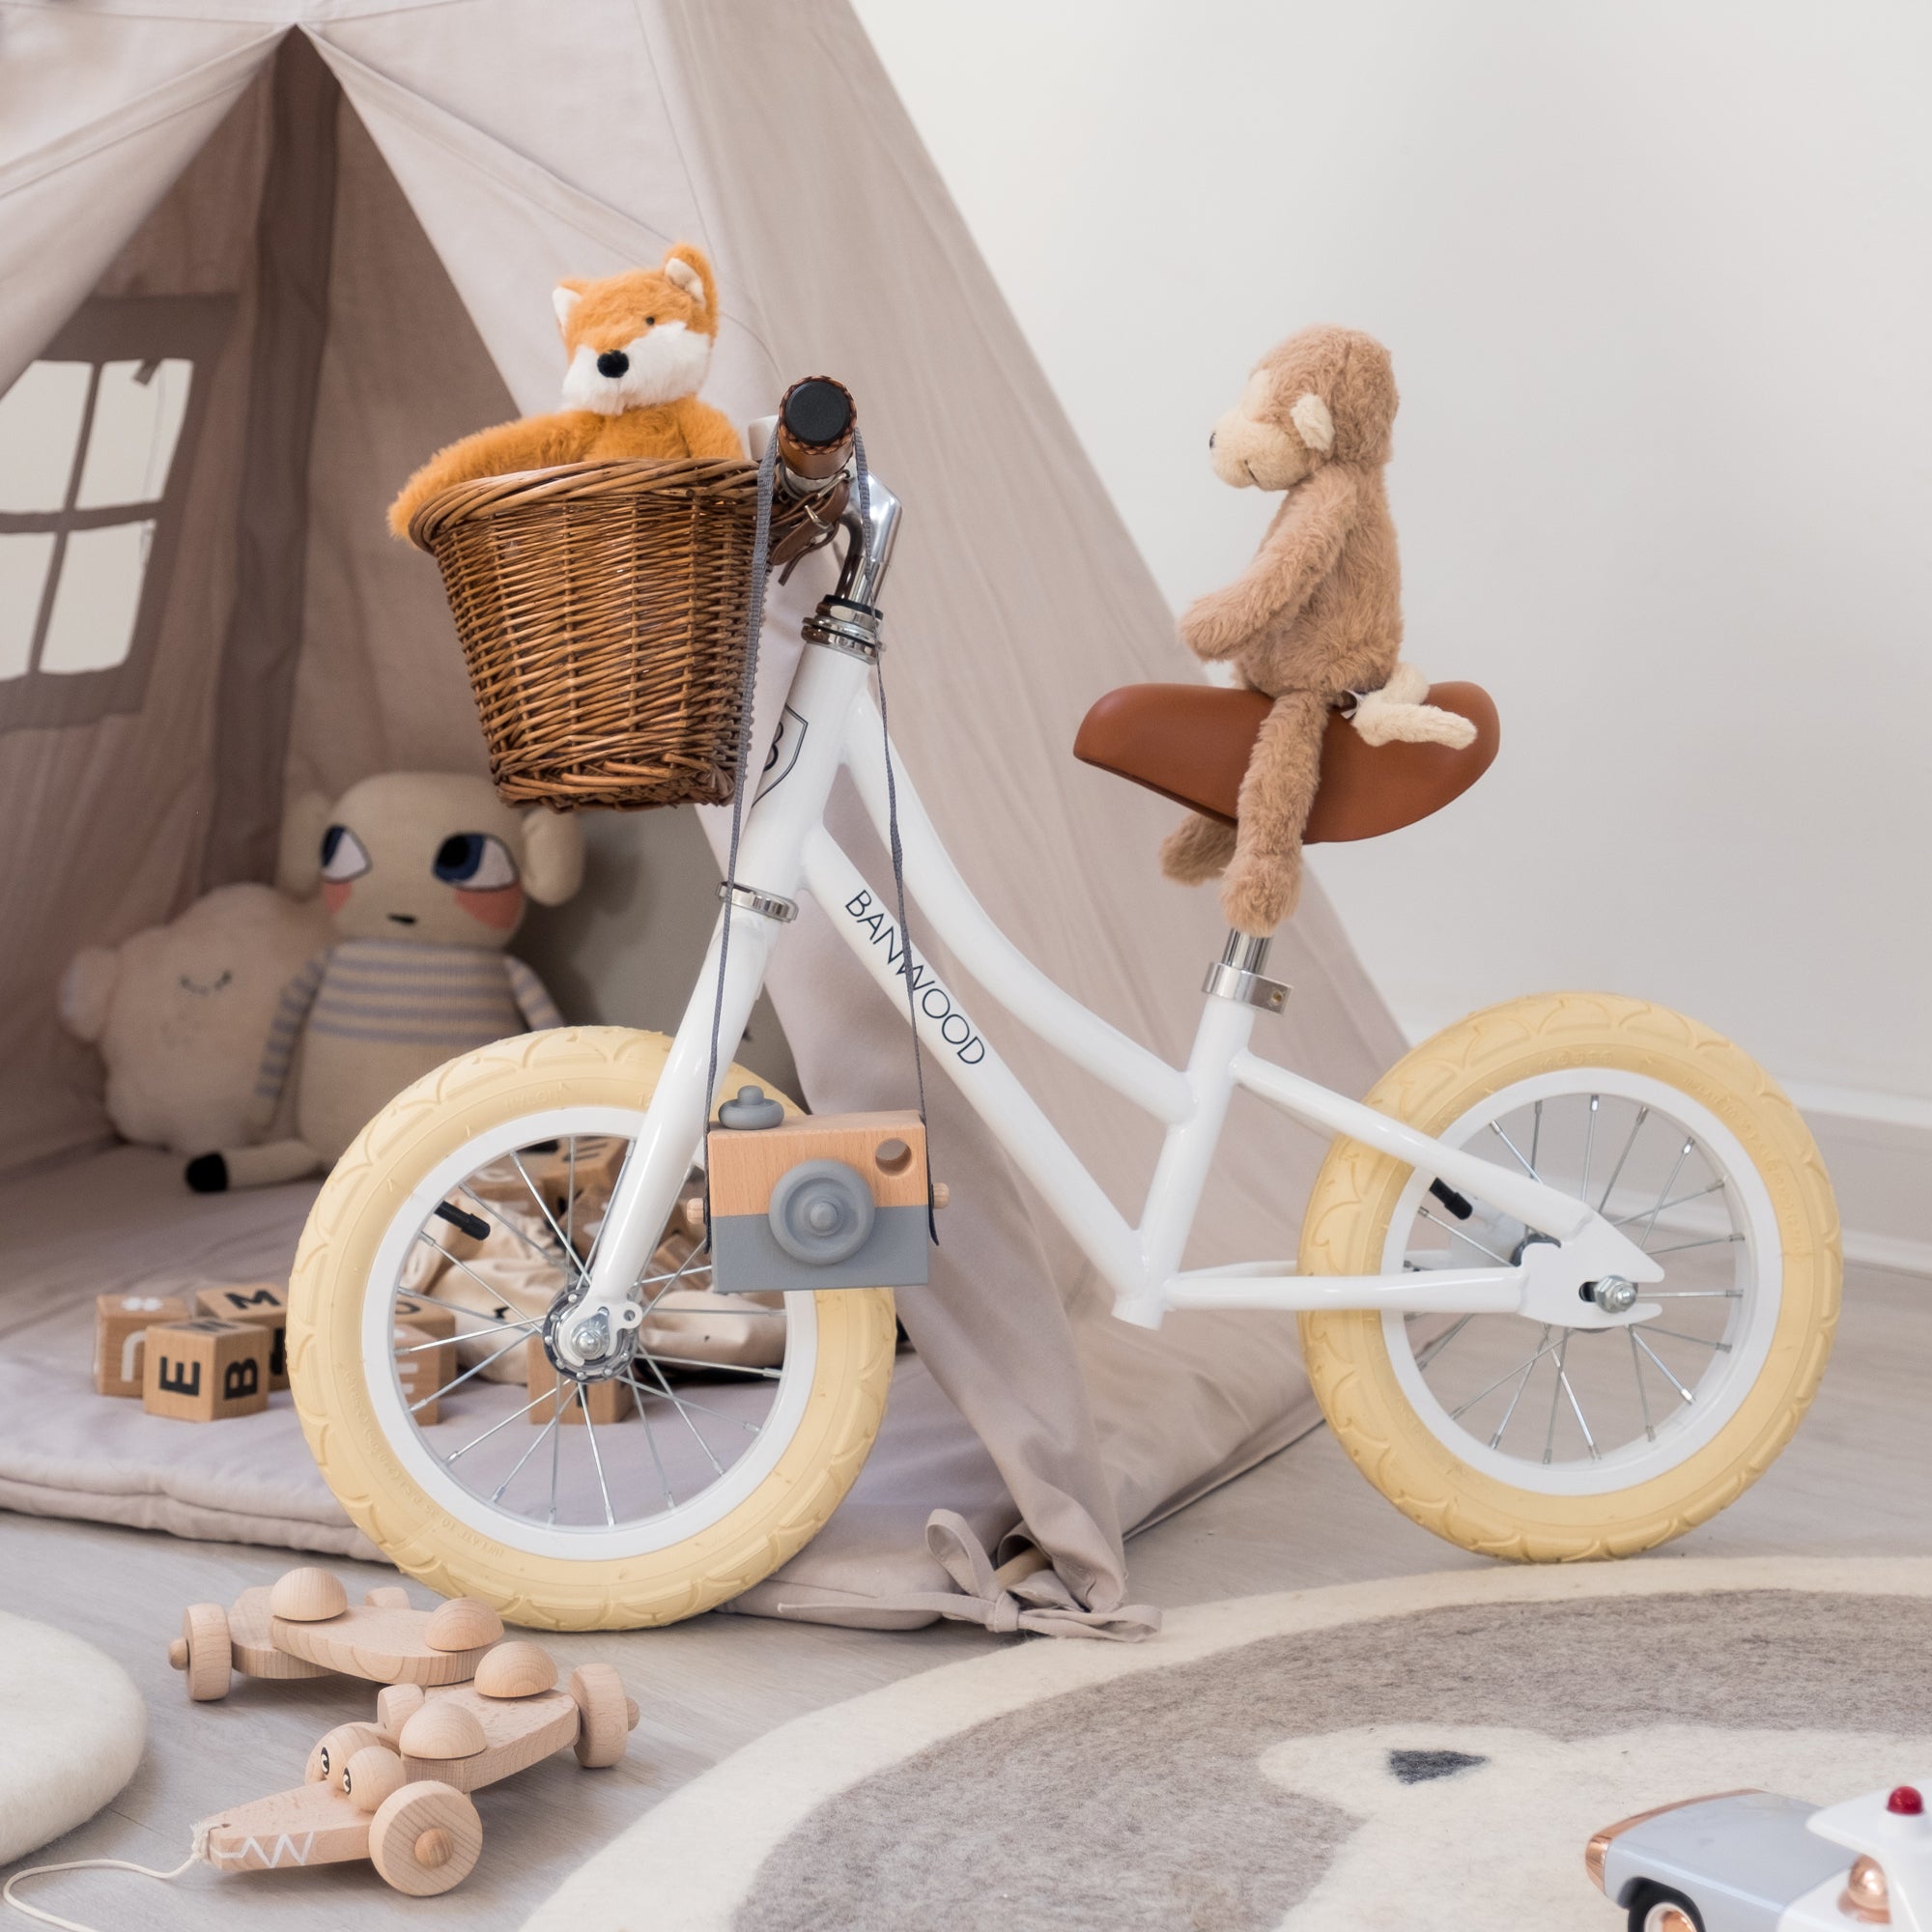 First Go Balance Bike by Banwood, styled by Bobby Rabbit.